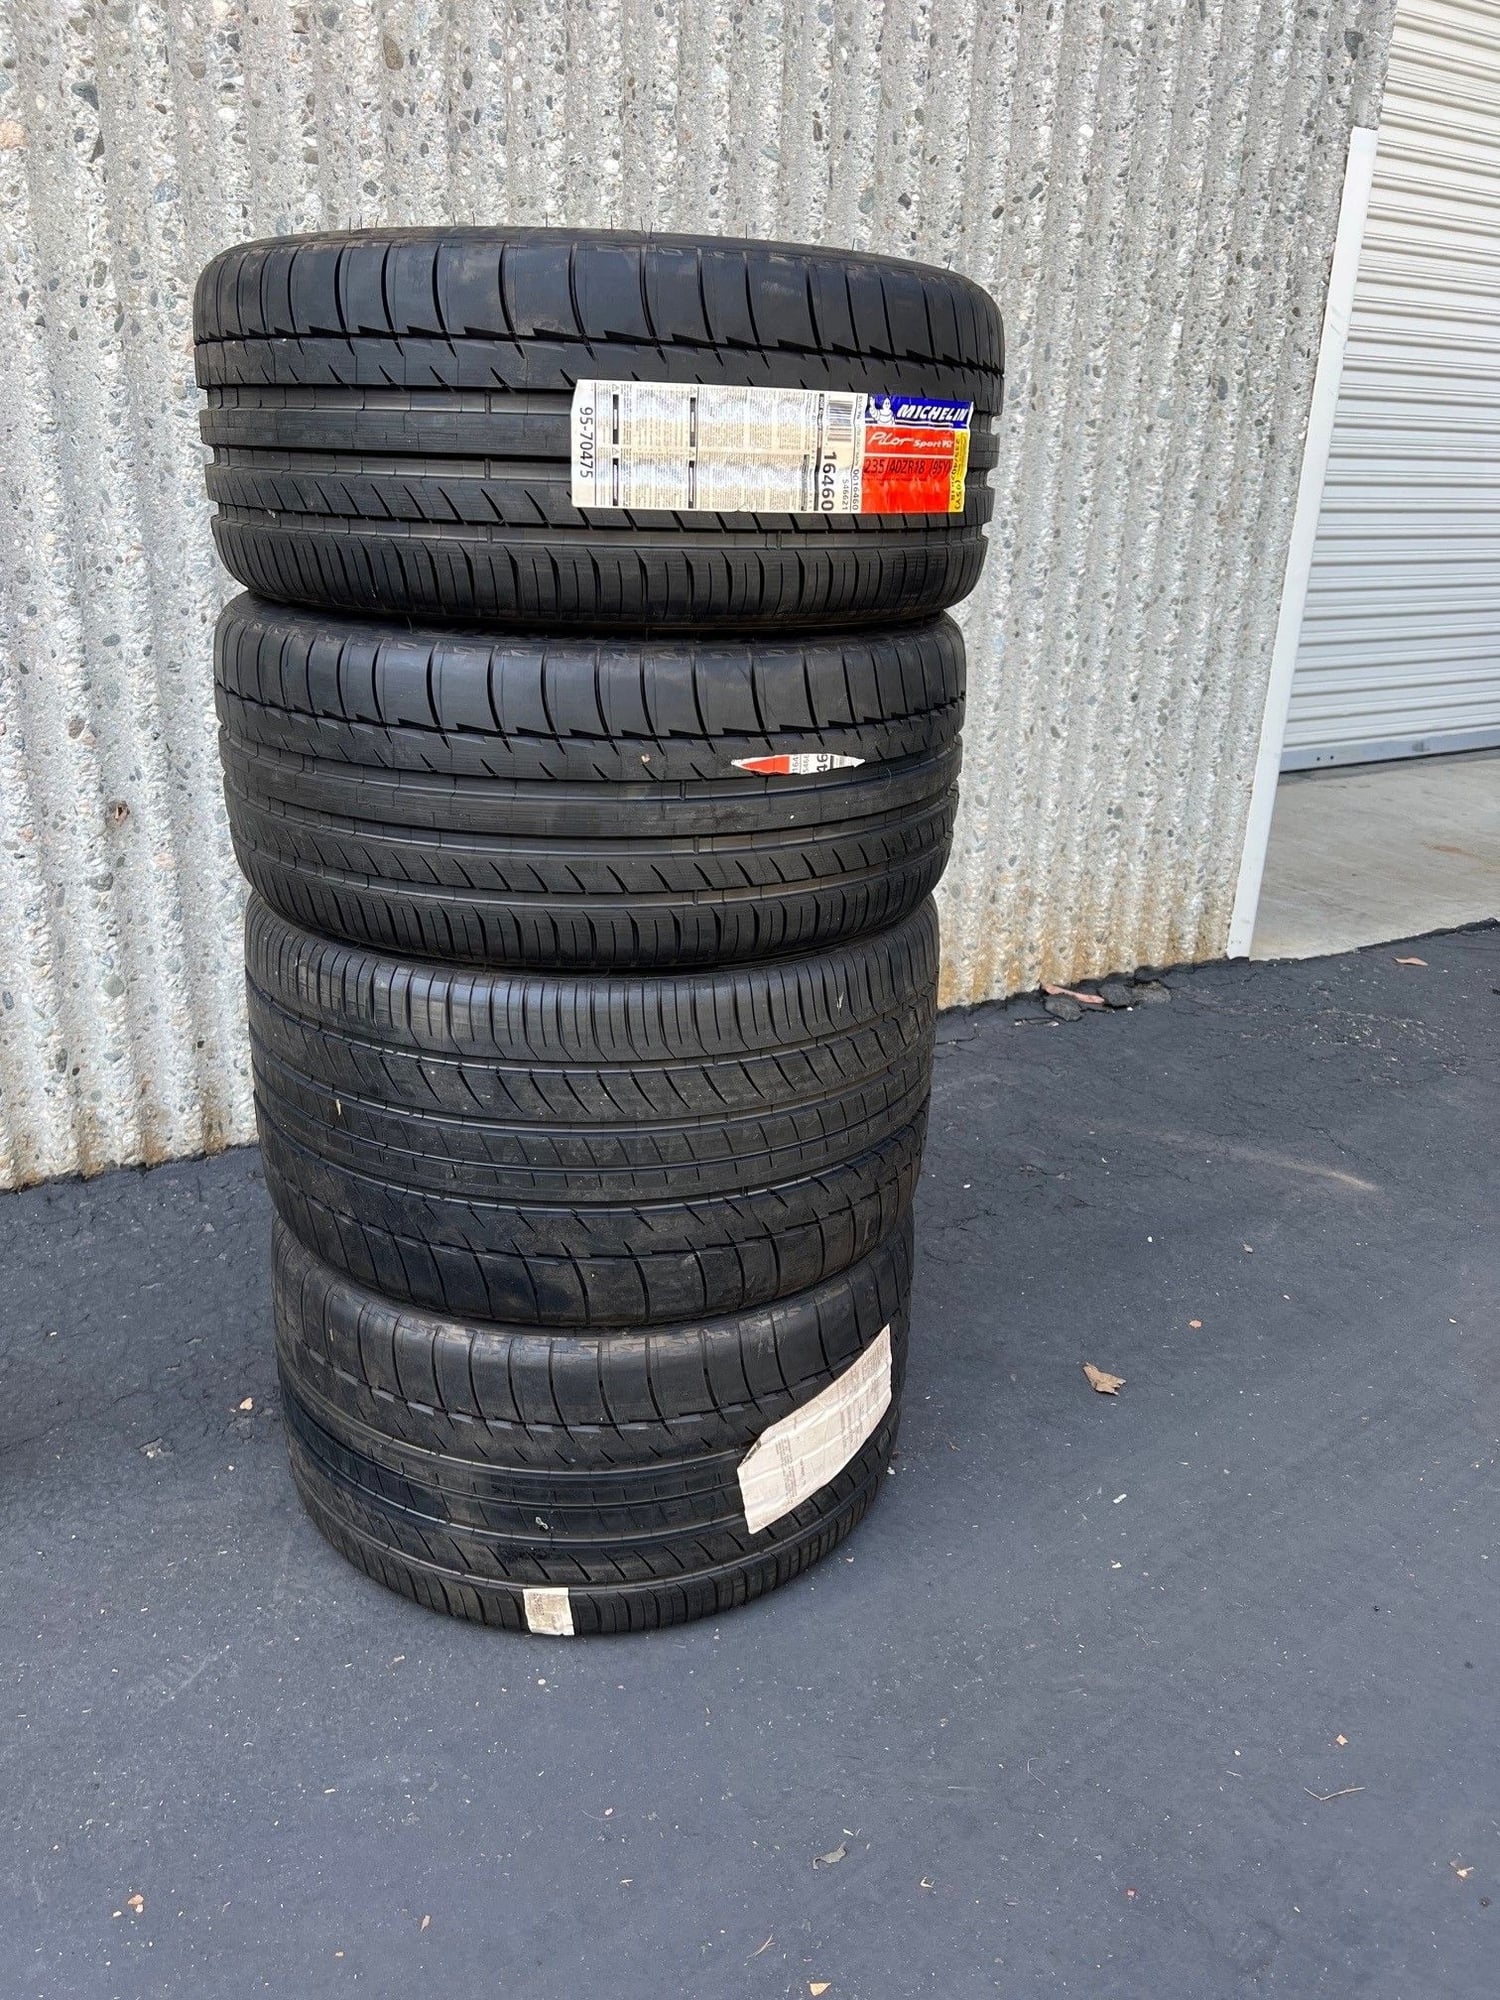 Wheels and Tires/Axles - FS: NEW Michelin Pilot Sport PS2's - New - All Years Any Make All Models - Brea, CA 92821, United States